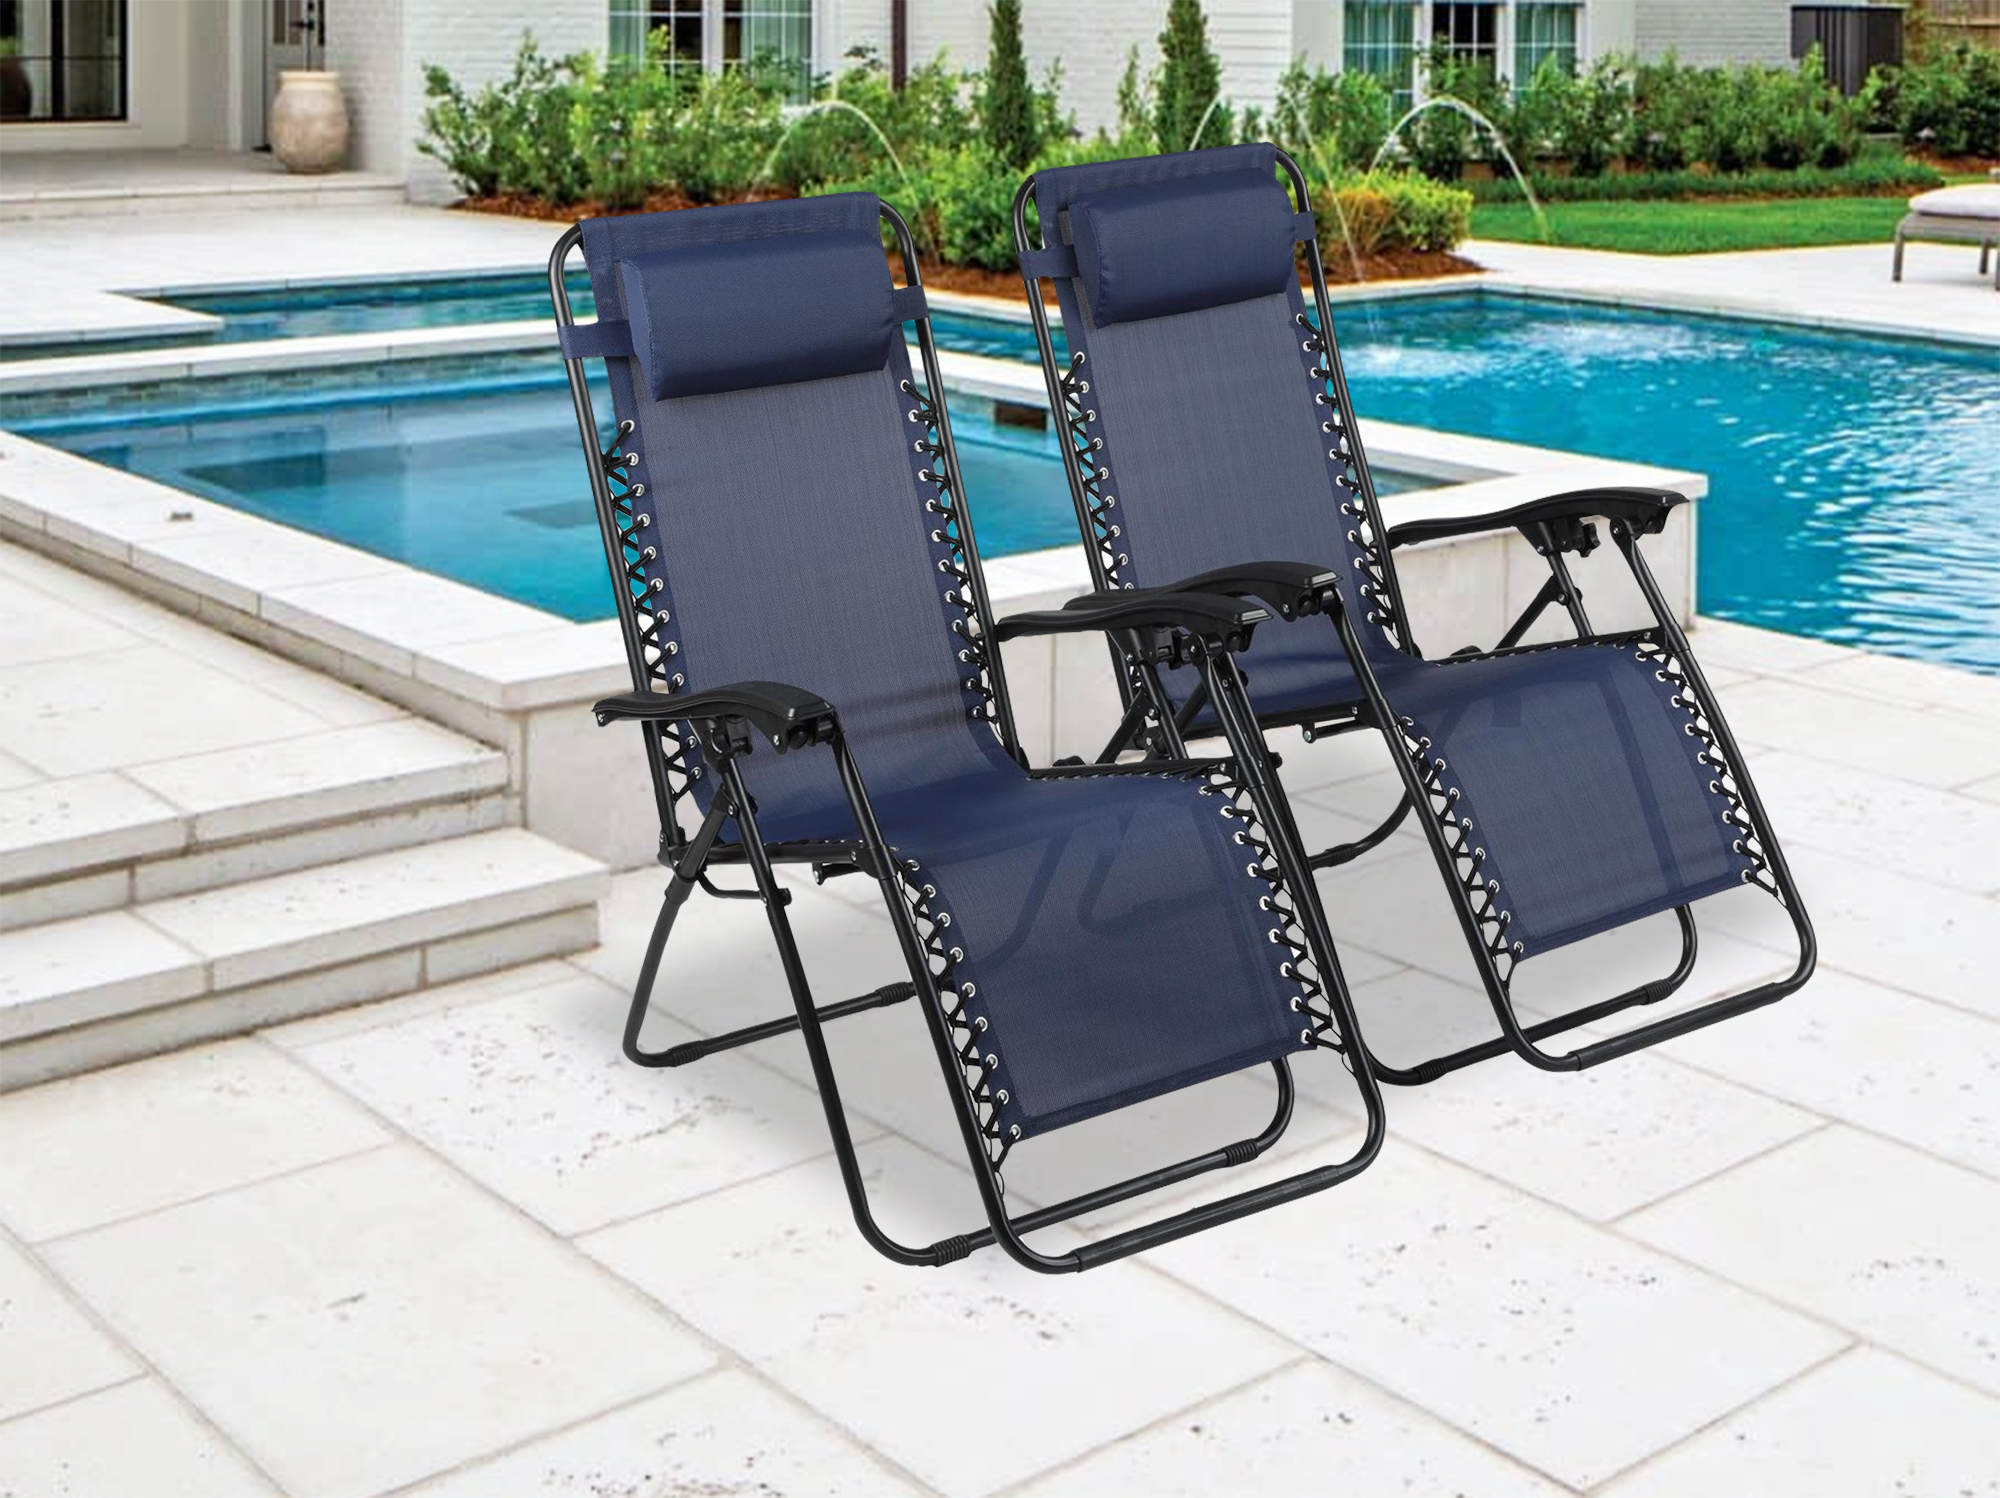 Zero Gravity Chairs Set of 2 Pool Lounge Chair Zero Gravity Recliner Lawn Patio Outdoor Porch Beach Backyard Anti Gravity Chair Folding Reclining Camping Chair, Blue - image 1 of 9